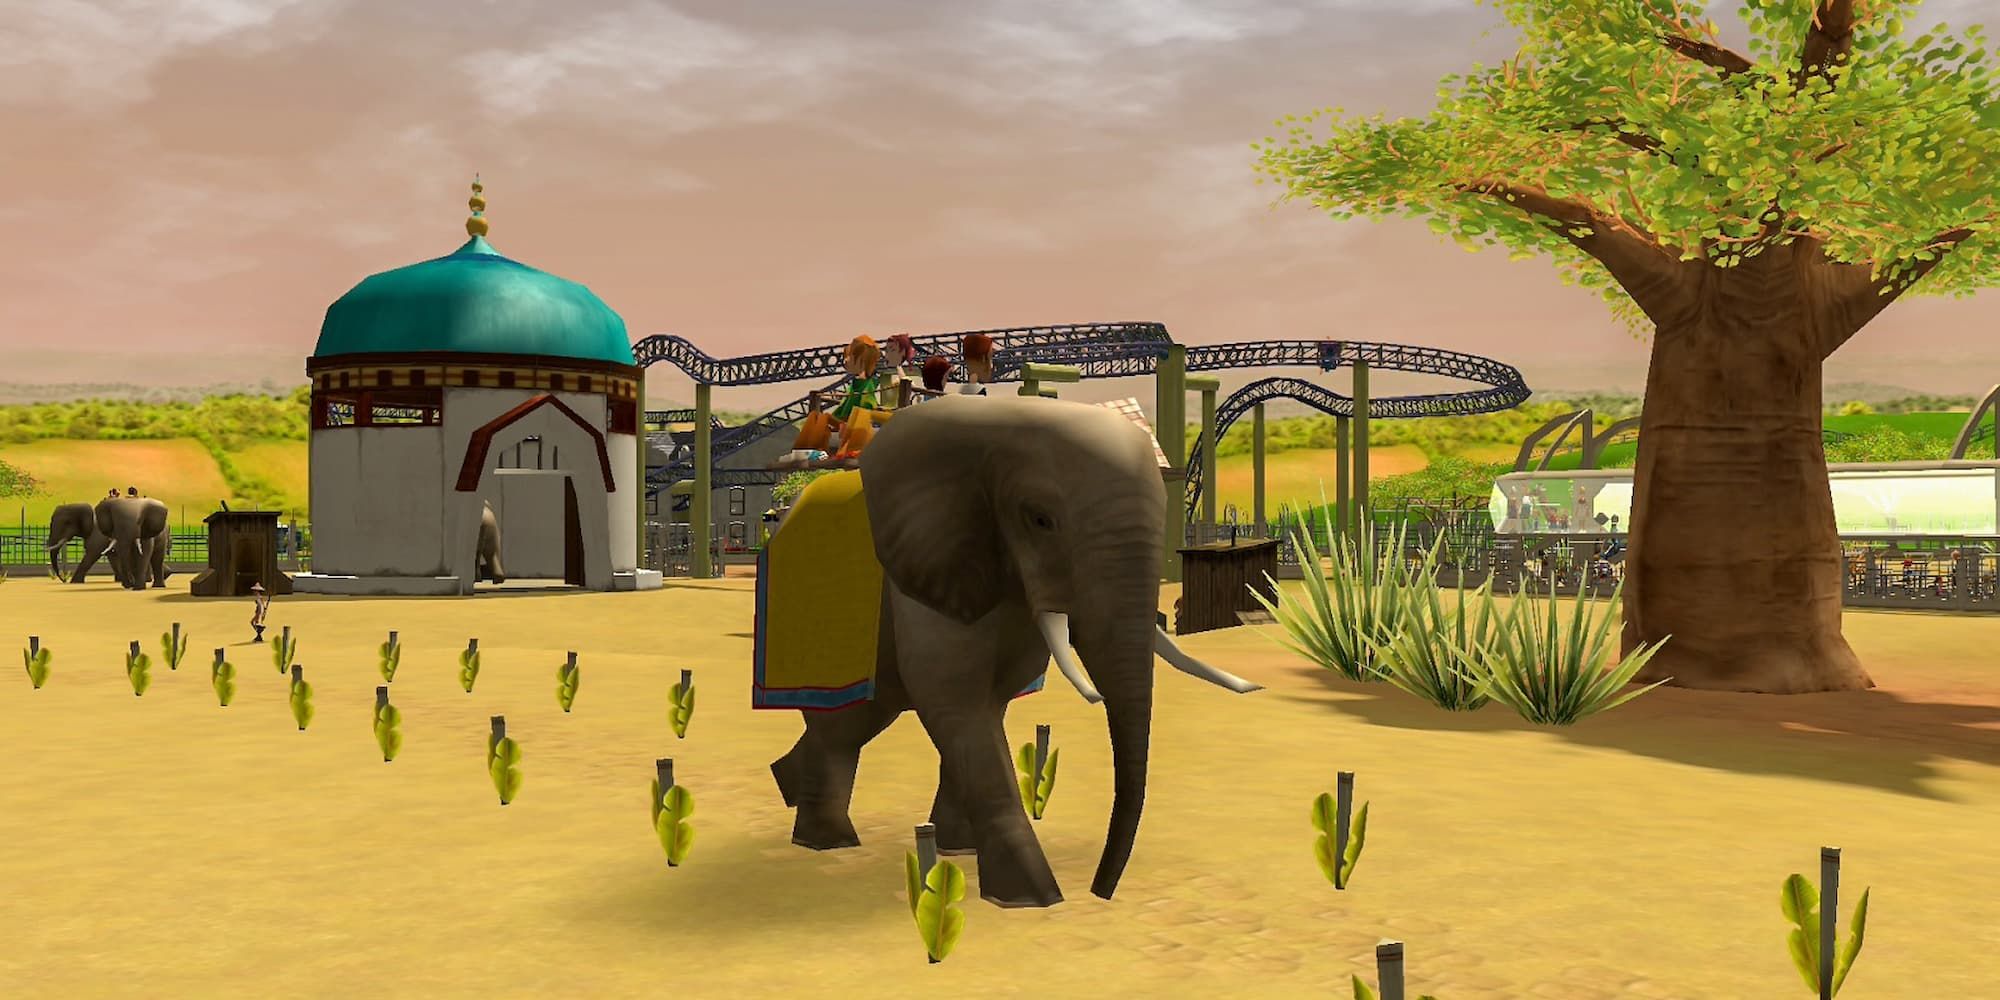 An elephant walks through the park in the Wild! expansion for RollerCoaster Tycoon 3.